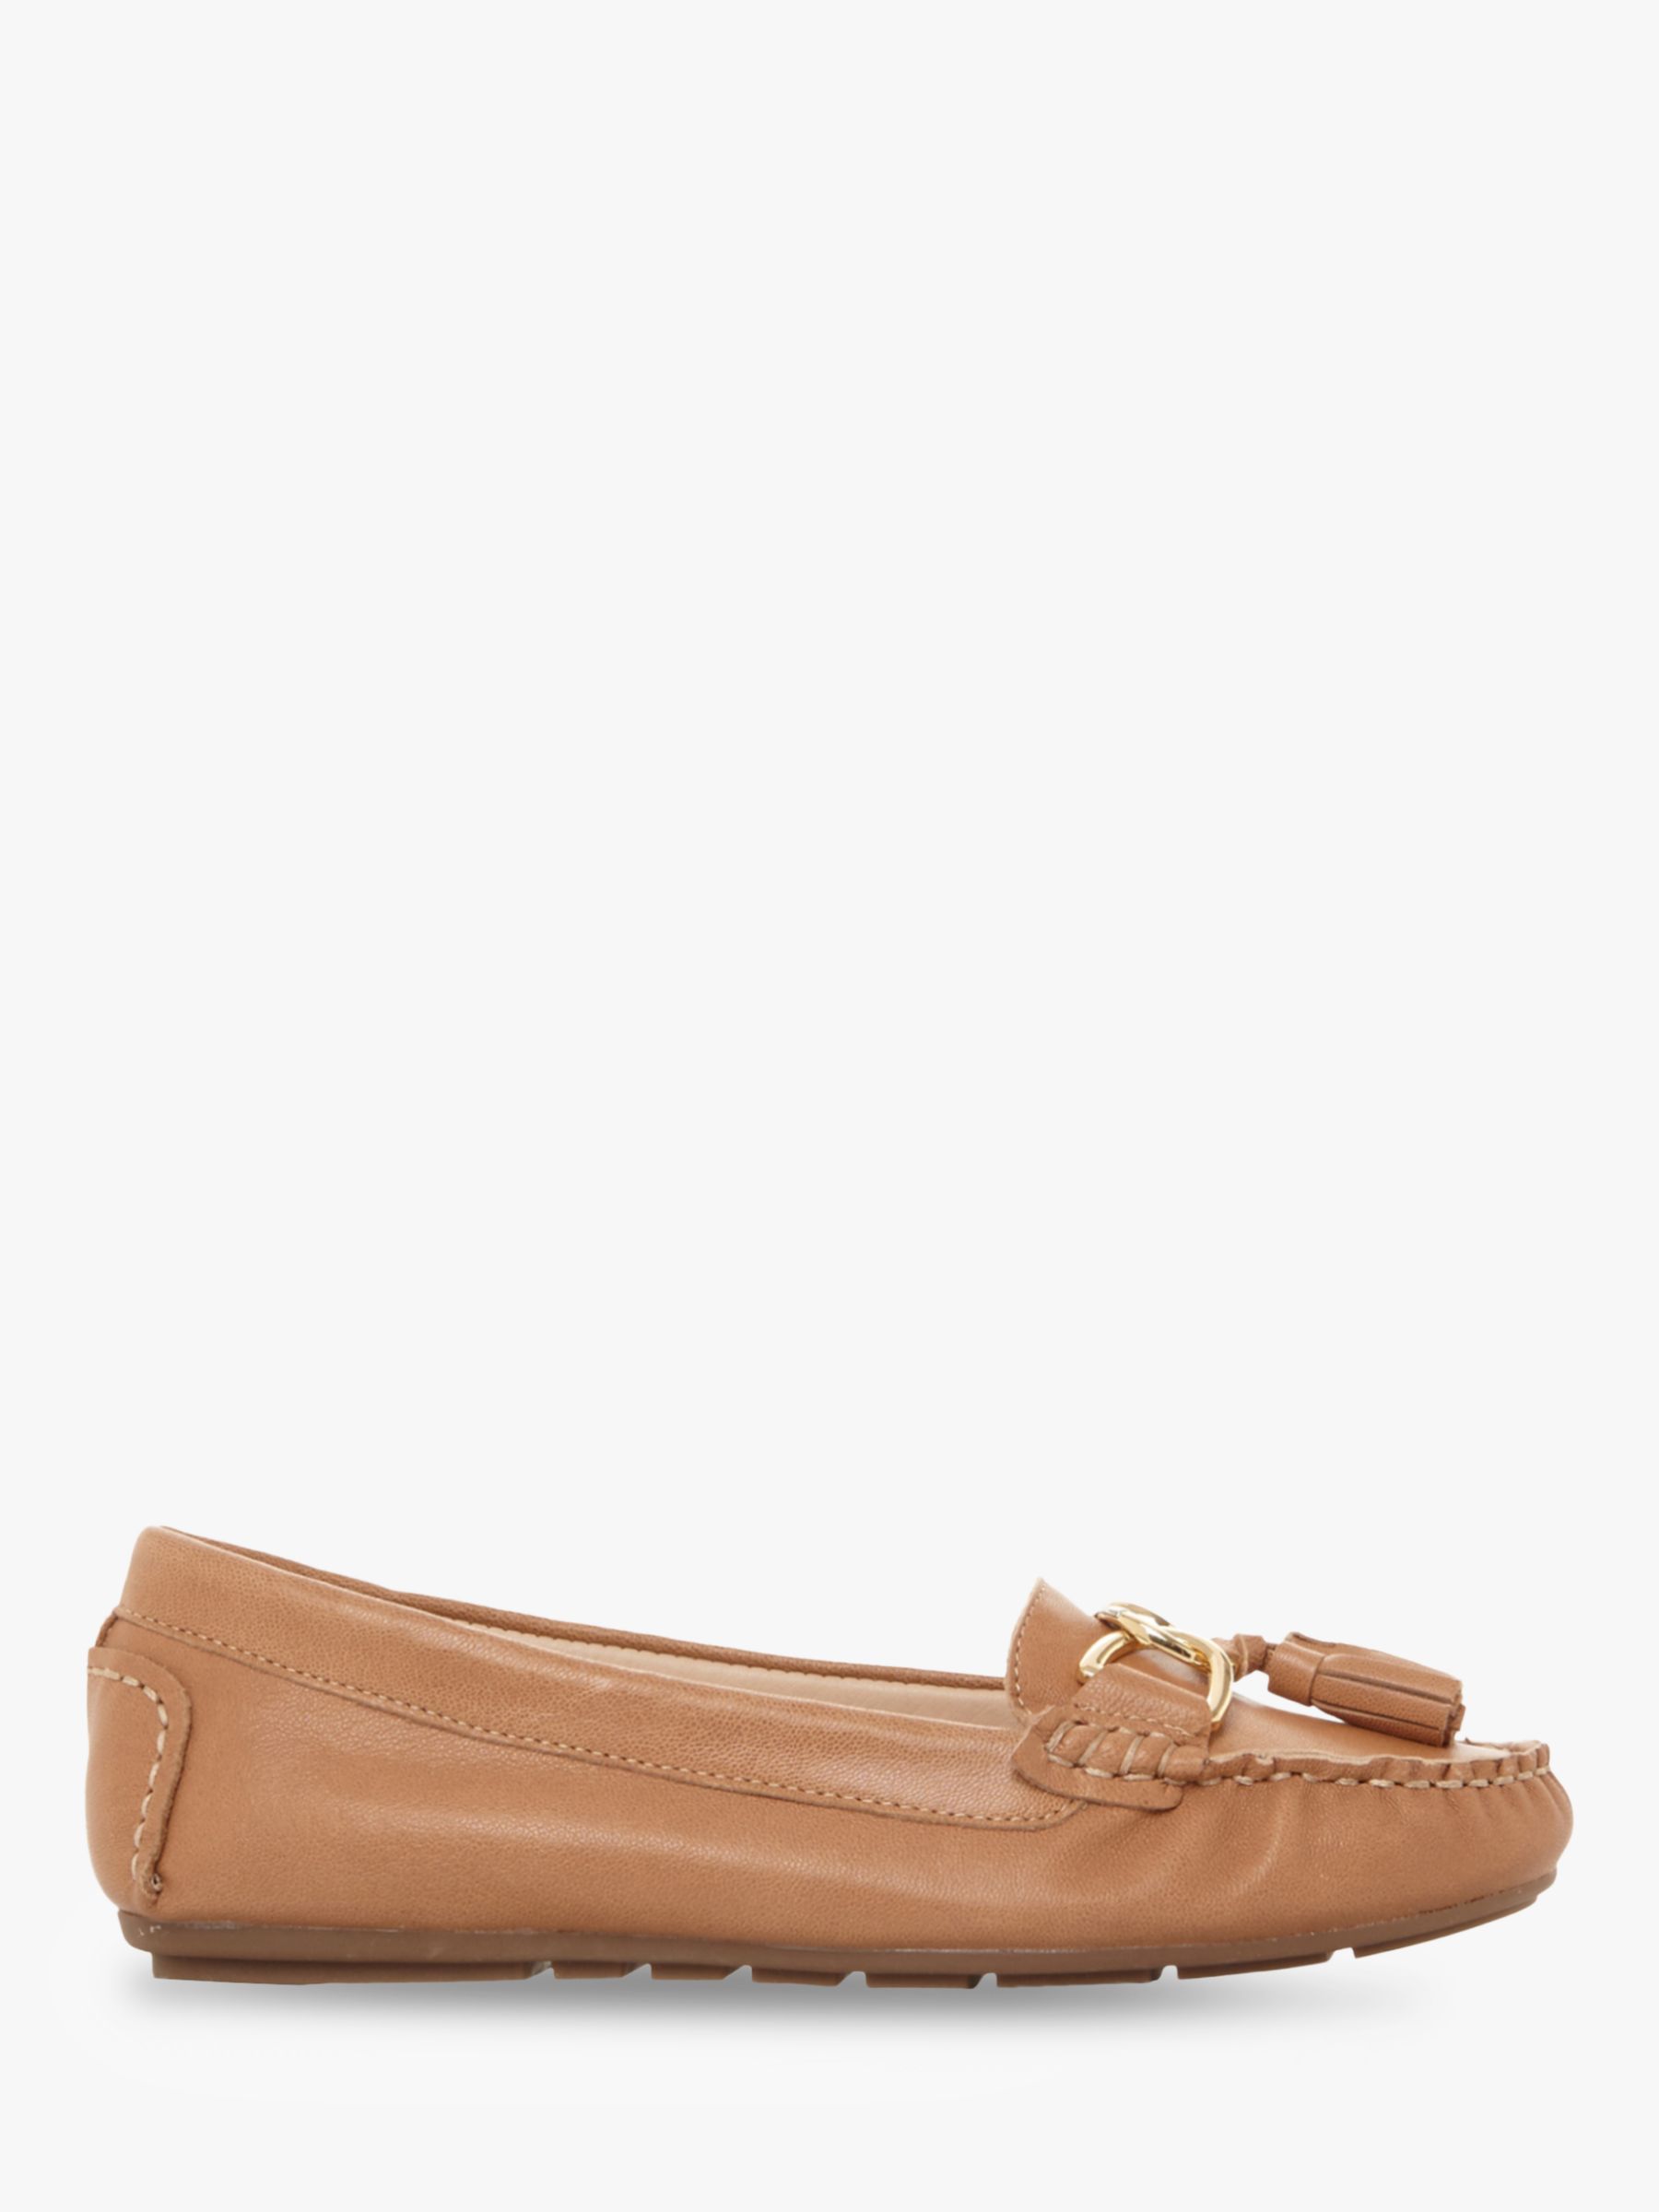 Dune Geena Tassel Moccasin Leather Loafers, Tan